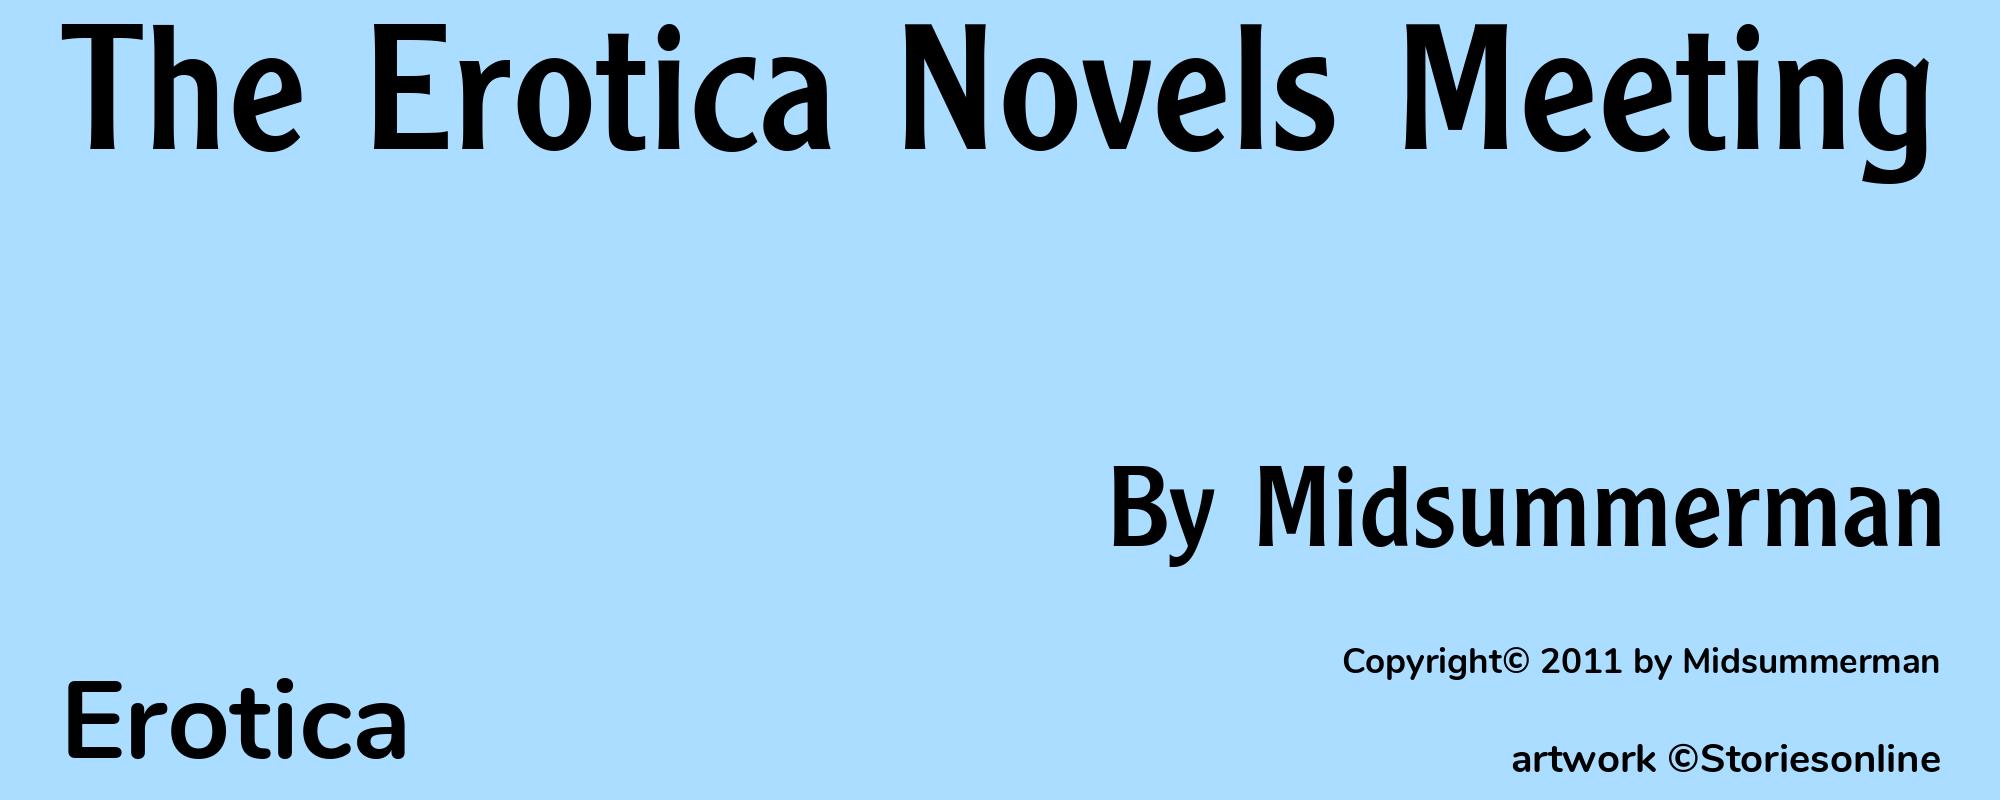 The Erotica Novels Meeting - Cover